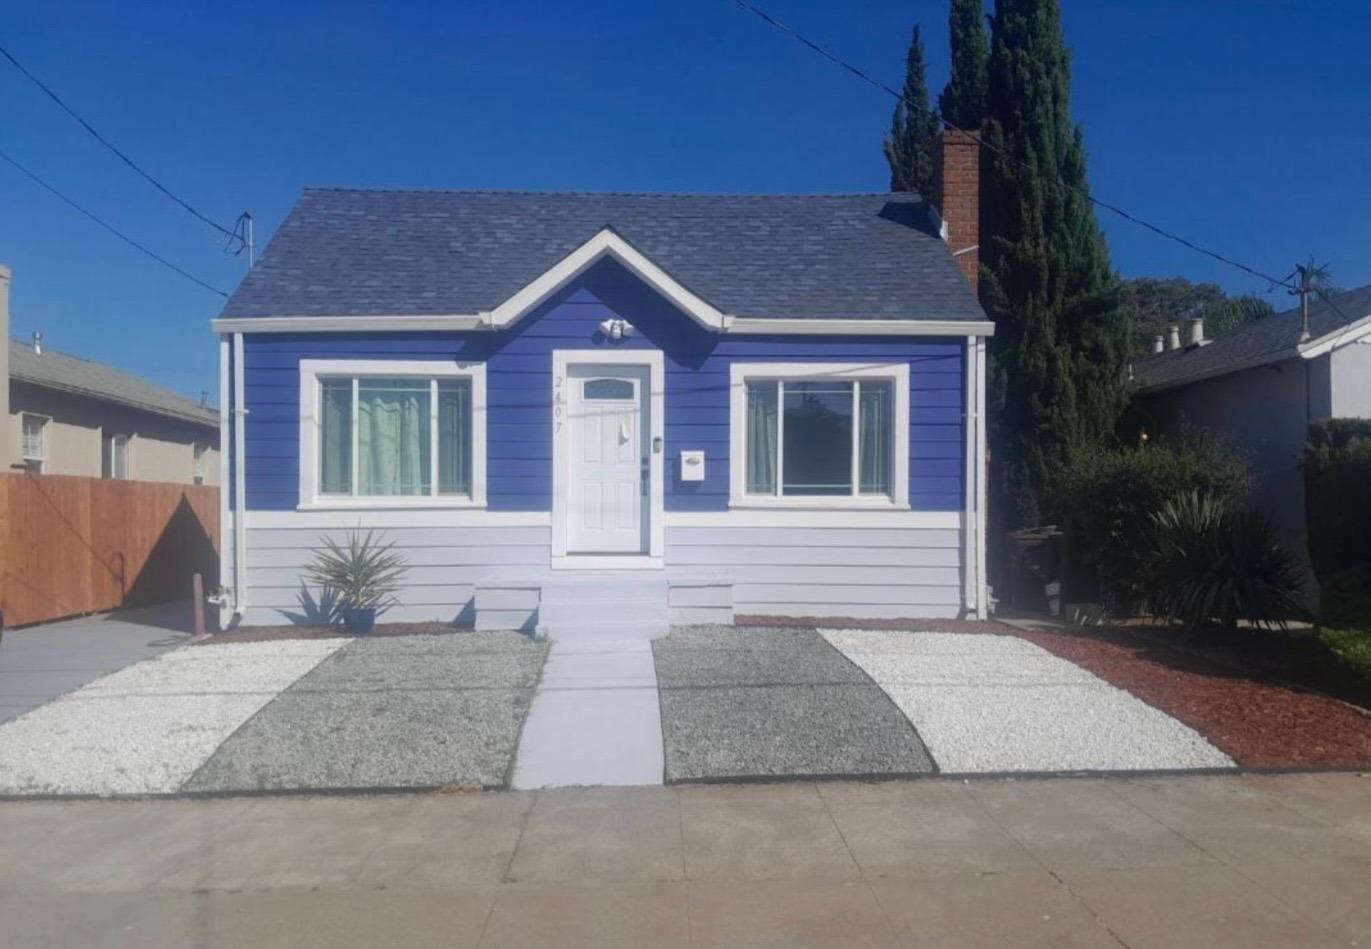 Photo of 2407 107th St in Oakland, CA